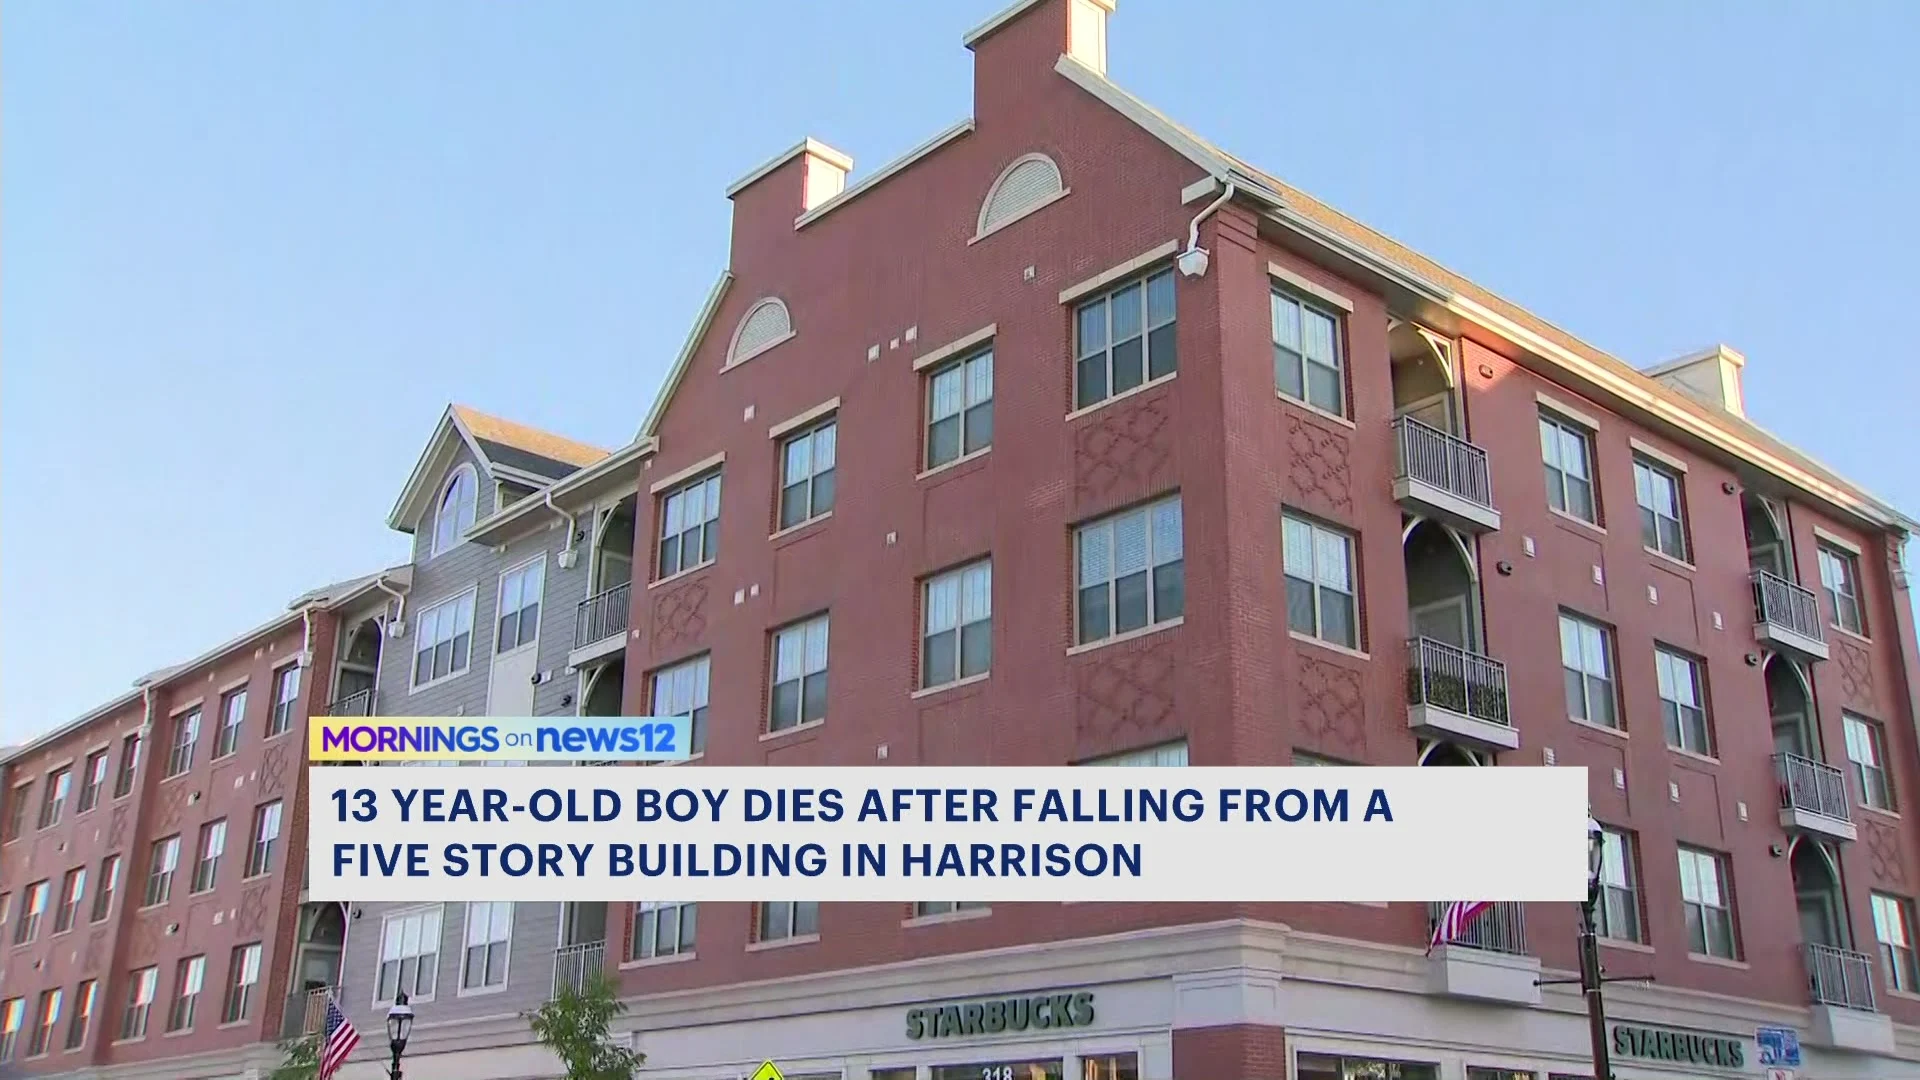 Harrison mourns death of 13-year-old boy after fall from building